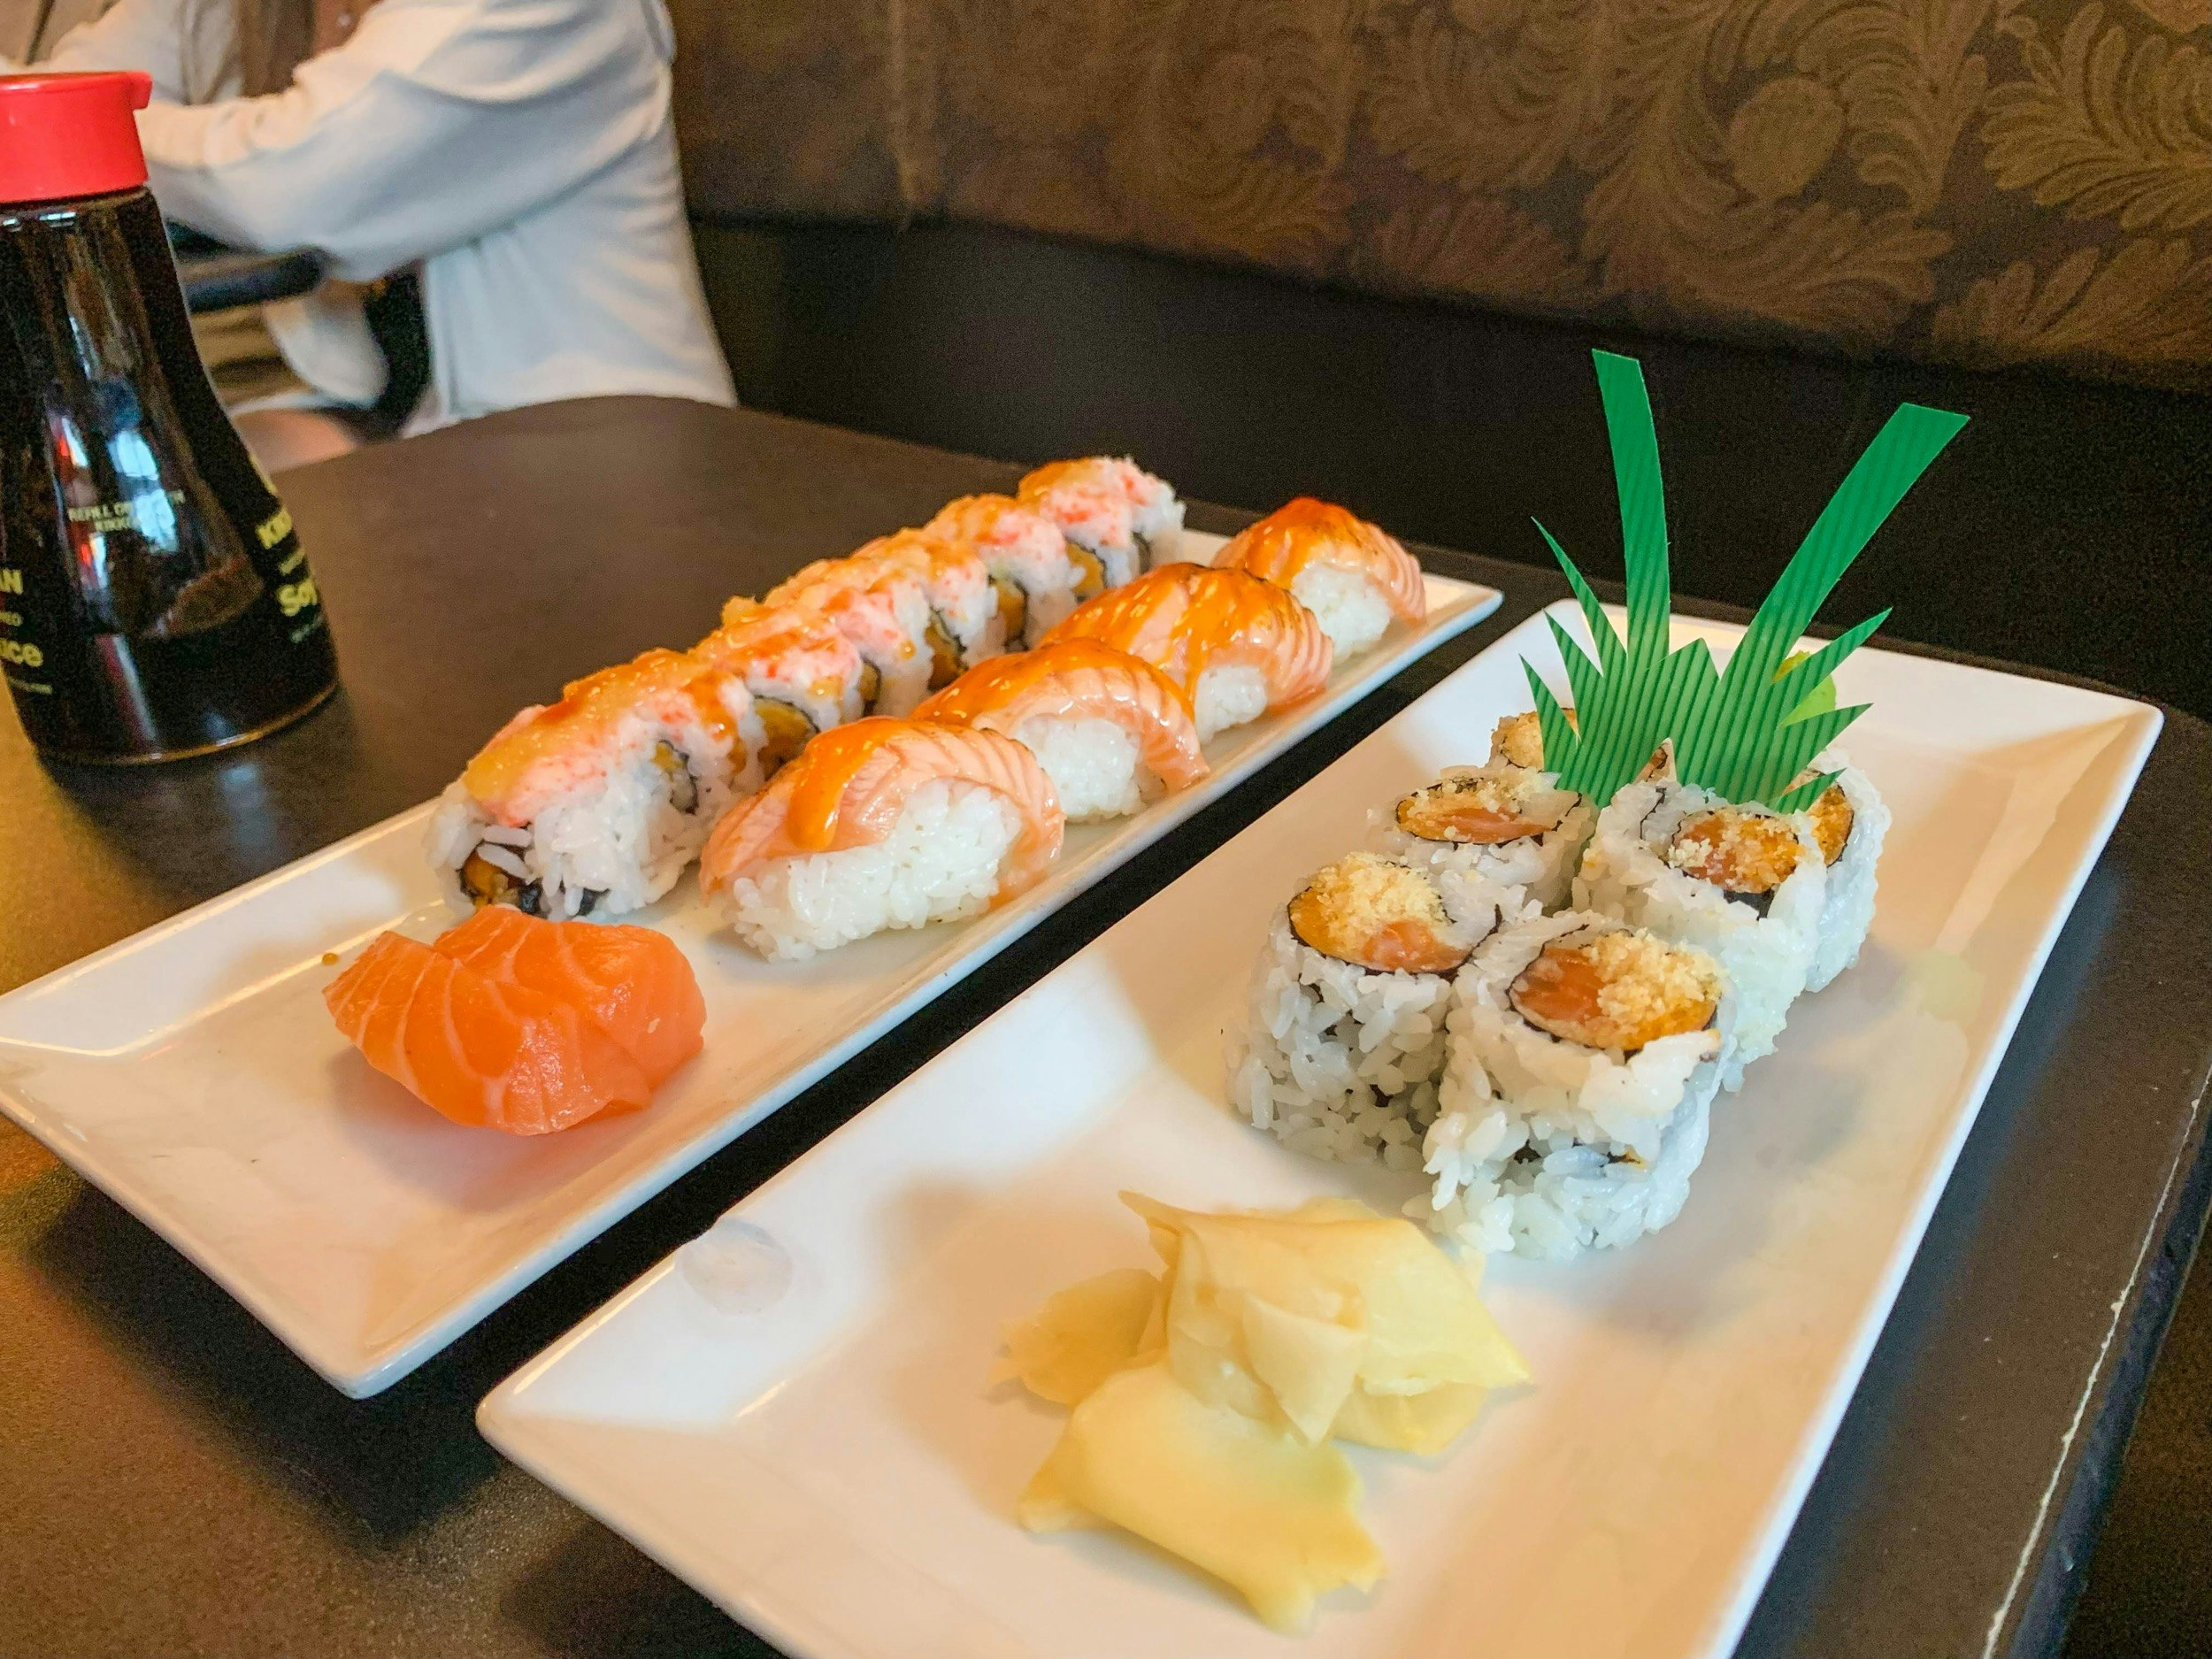 Two plates of sushi - one nigiri and one maki - are served with soy sauce